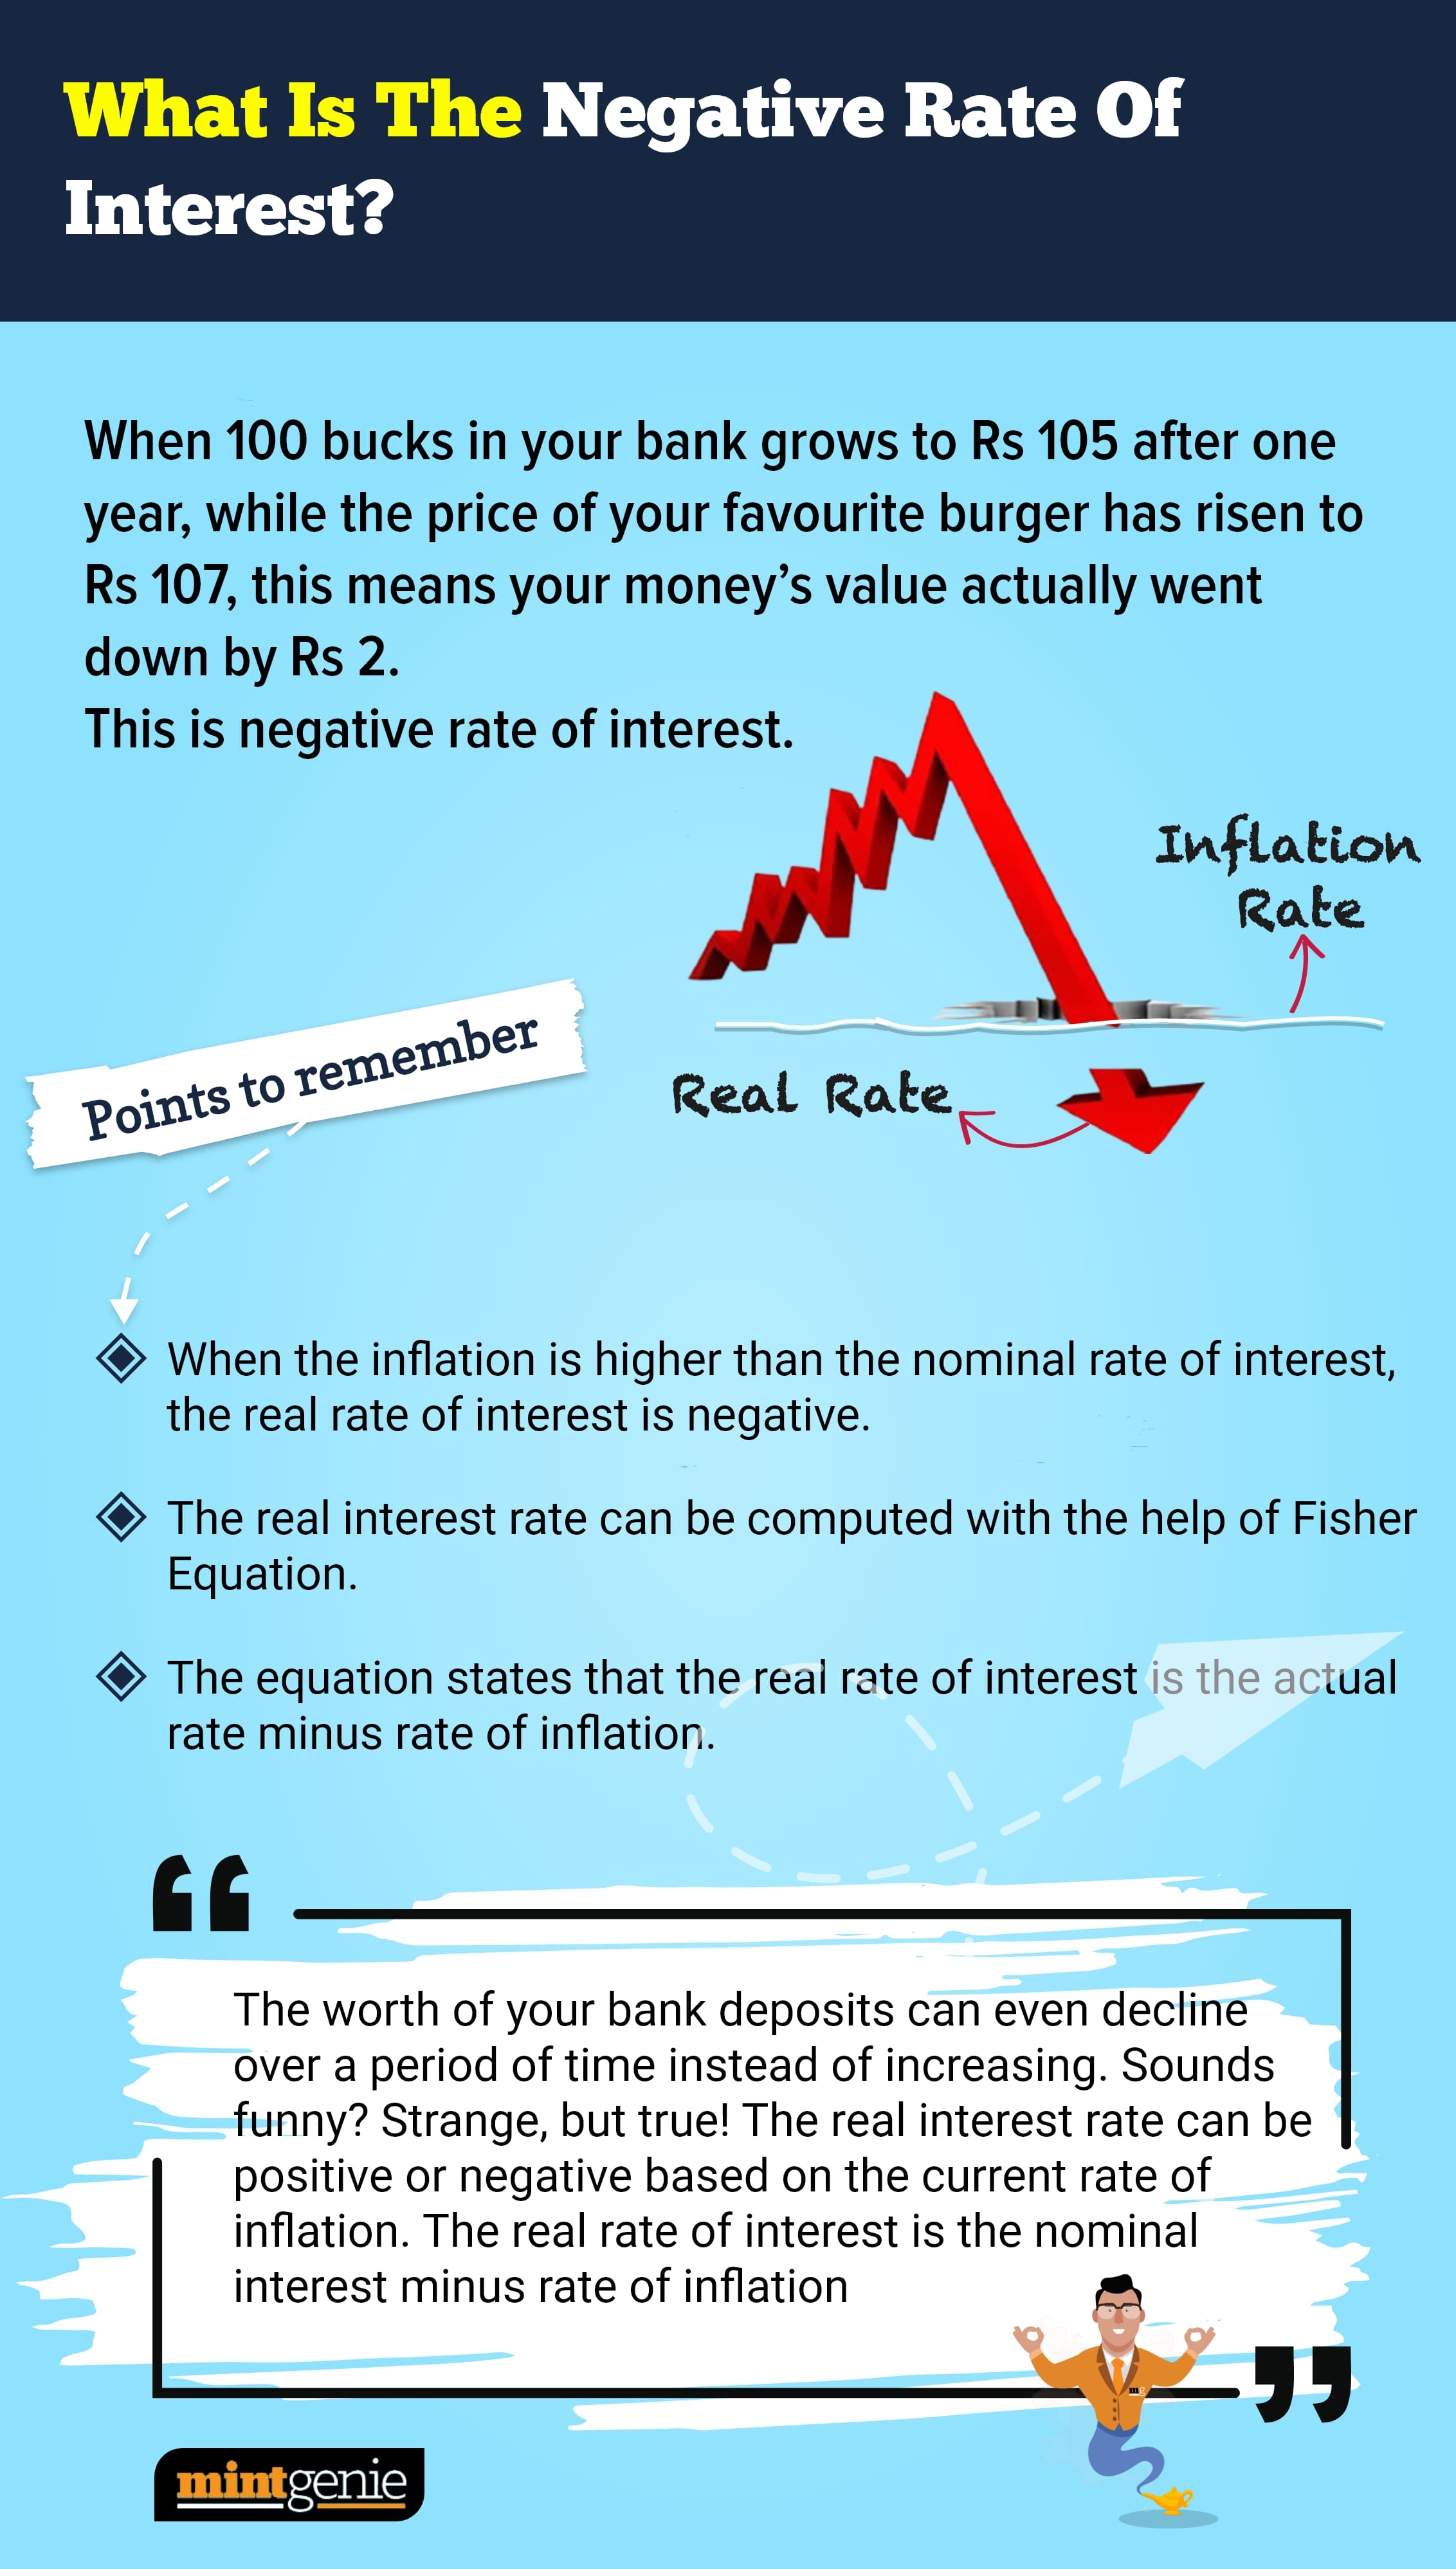 When the inflation is higher than the nominal rate, the real rate of interest is negative,.&nbsp;